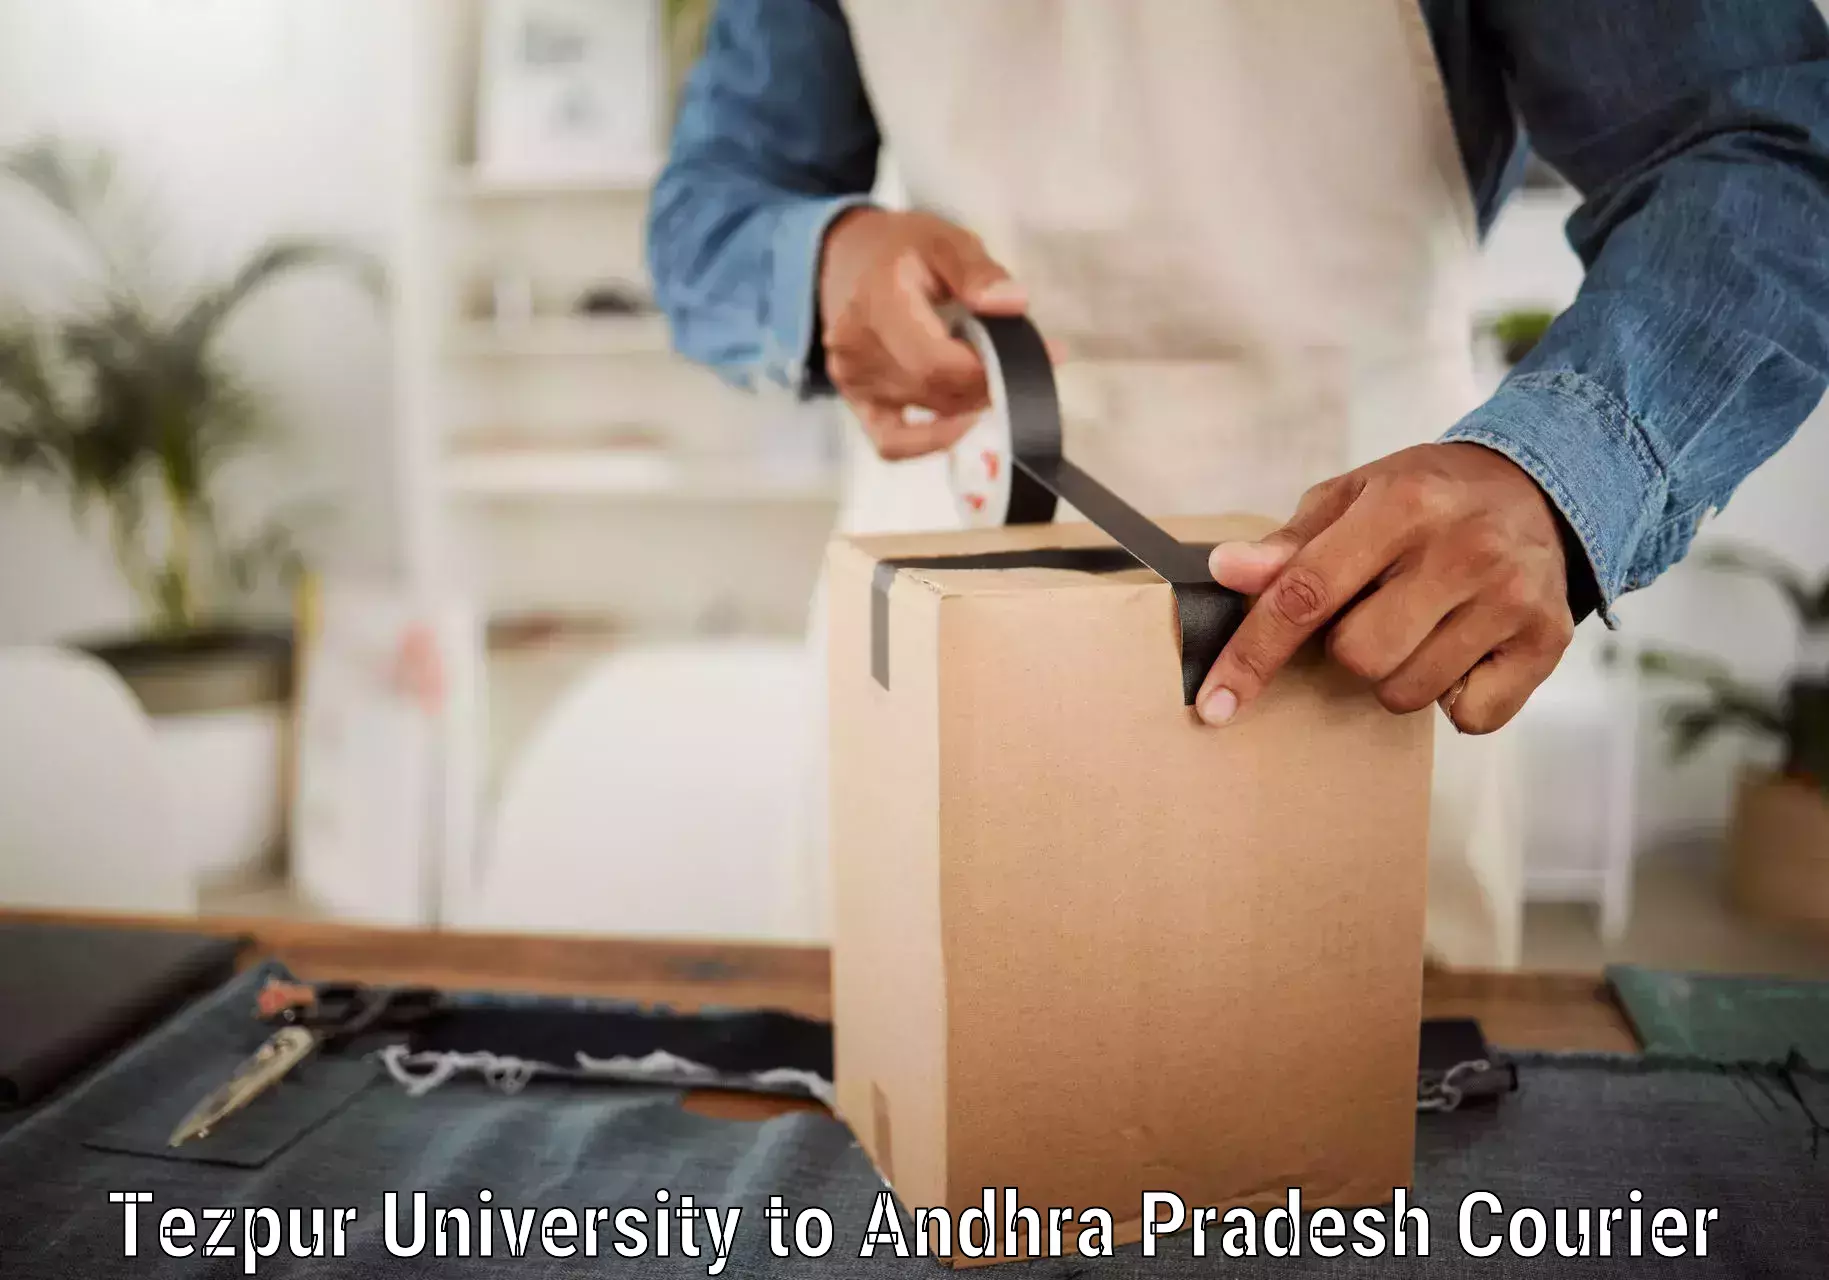 Fast delivery service Tezpur University to Andhra Pradesh